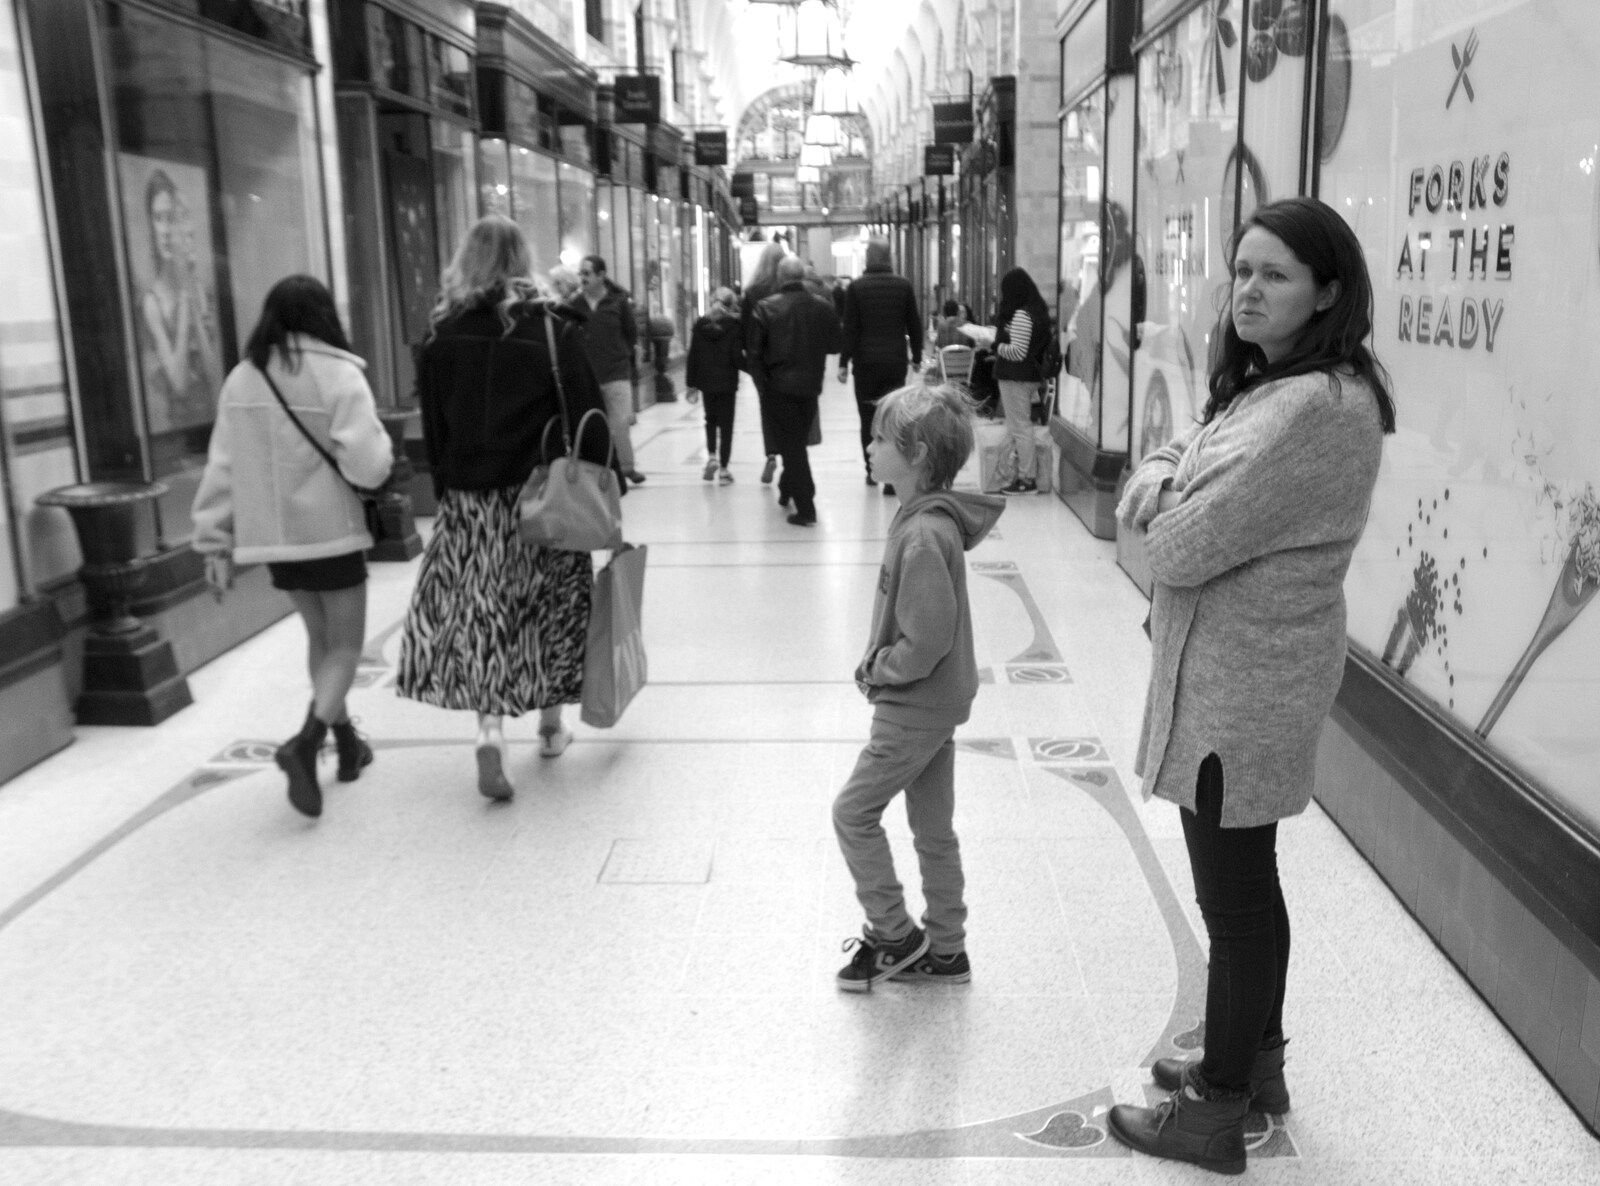 Harry and Isobel in Royal Arcade from A Trip up the Big City, Norwich, Norfolk - 18th October 2019